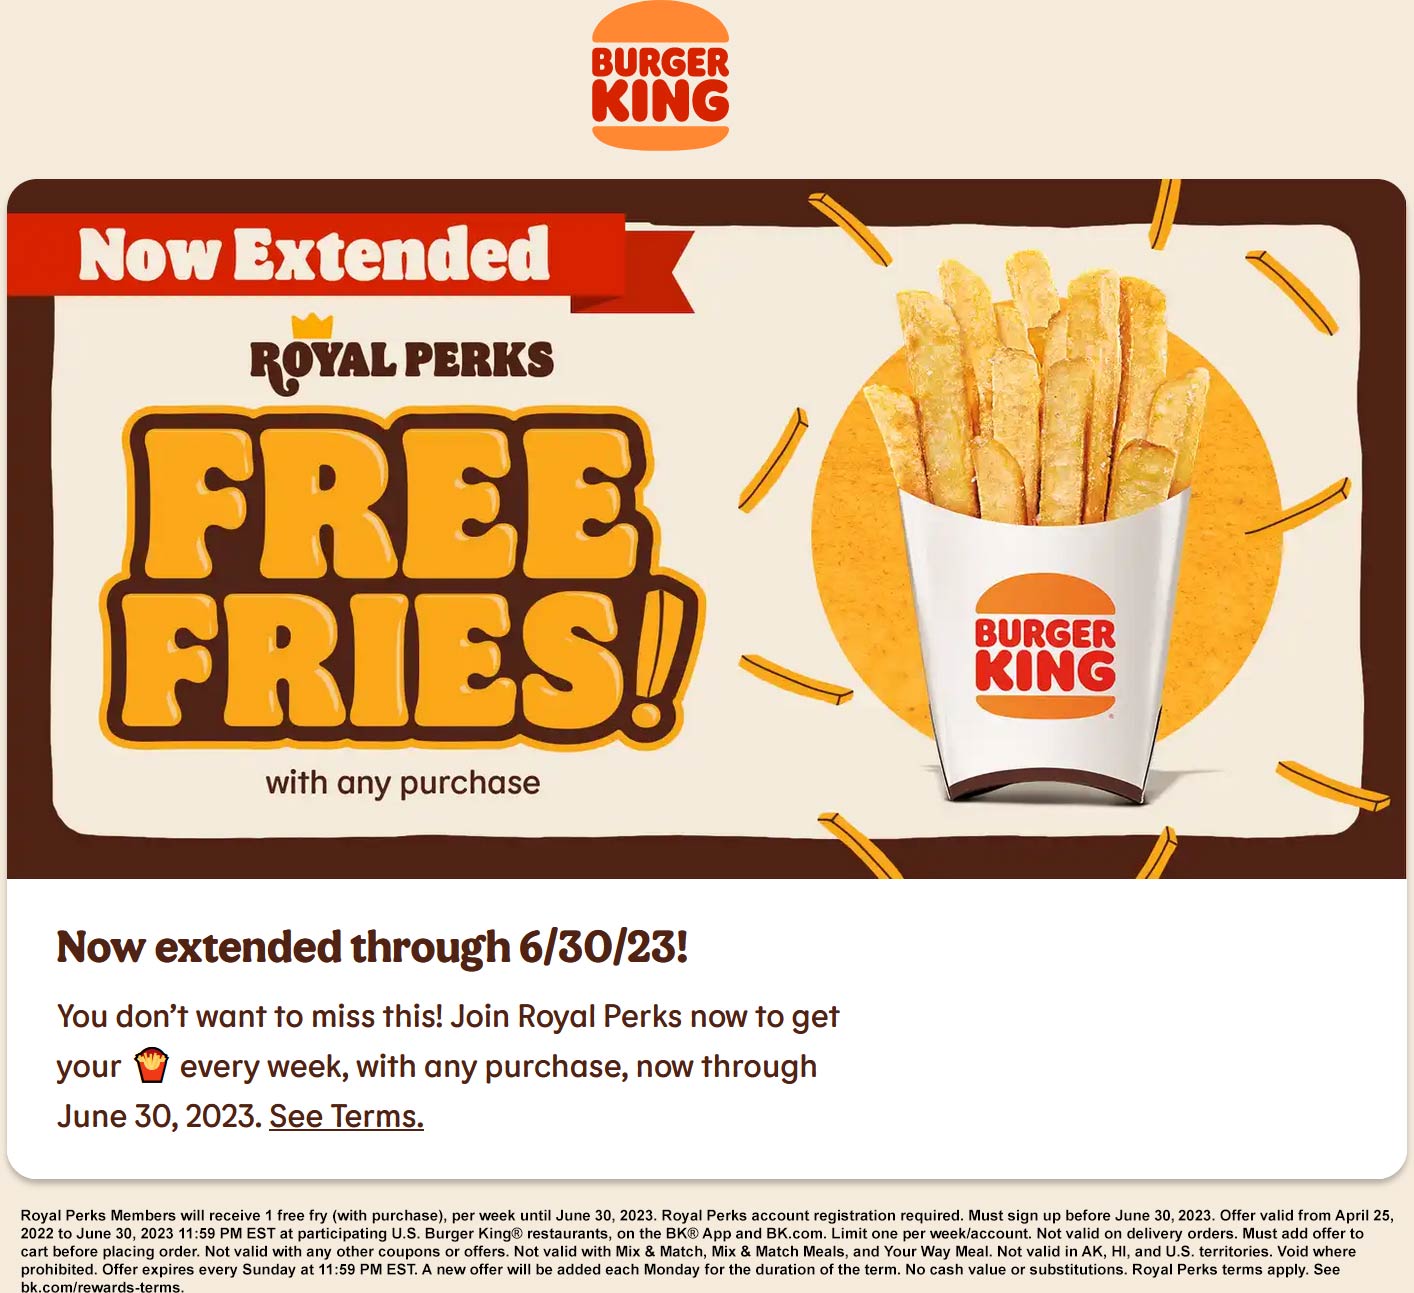 Burger King restaurants Coupon  Free fries with any purchase via mobile at Burger King restaurants #burgerking 